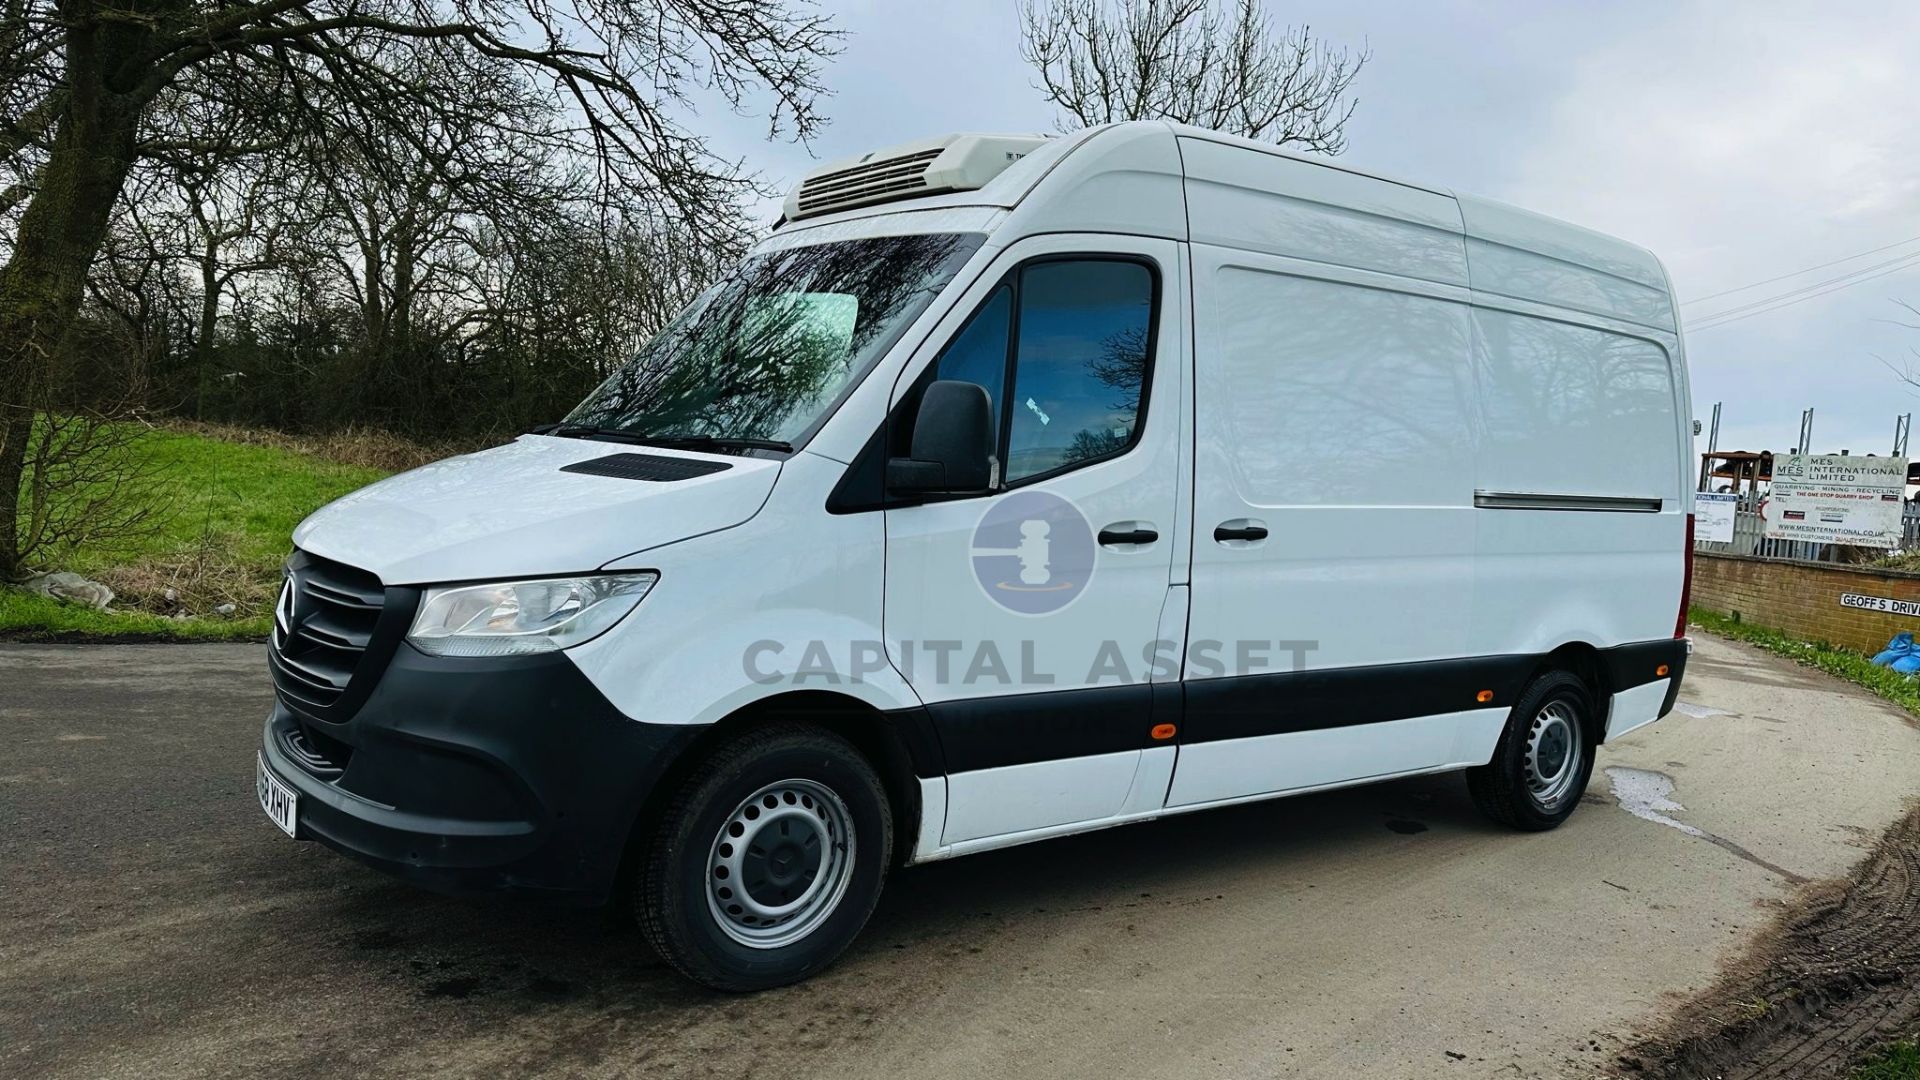 MERCEDES-BENZ SPRINTER 314 CDI *MWB - REFRIGERATED VAN* (2019 - FACELIFT MODEL) *OVERNIGHT STANDBY* - Image 9 of 41